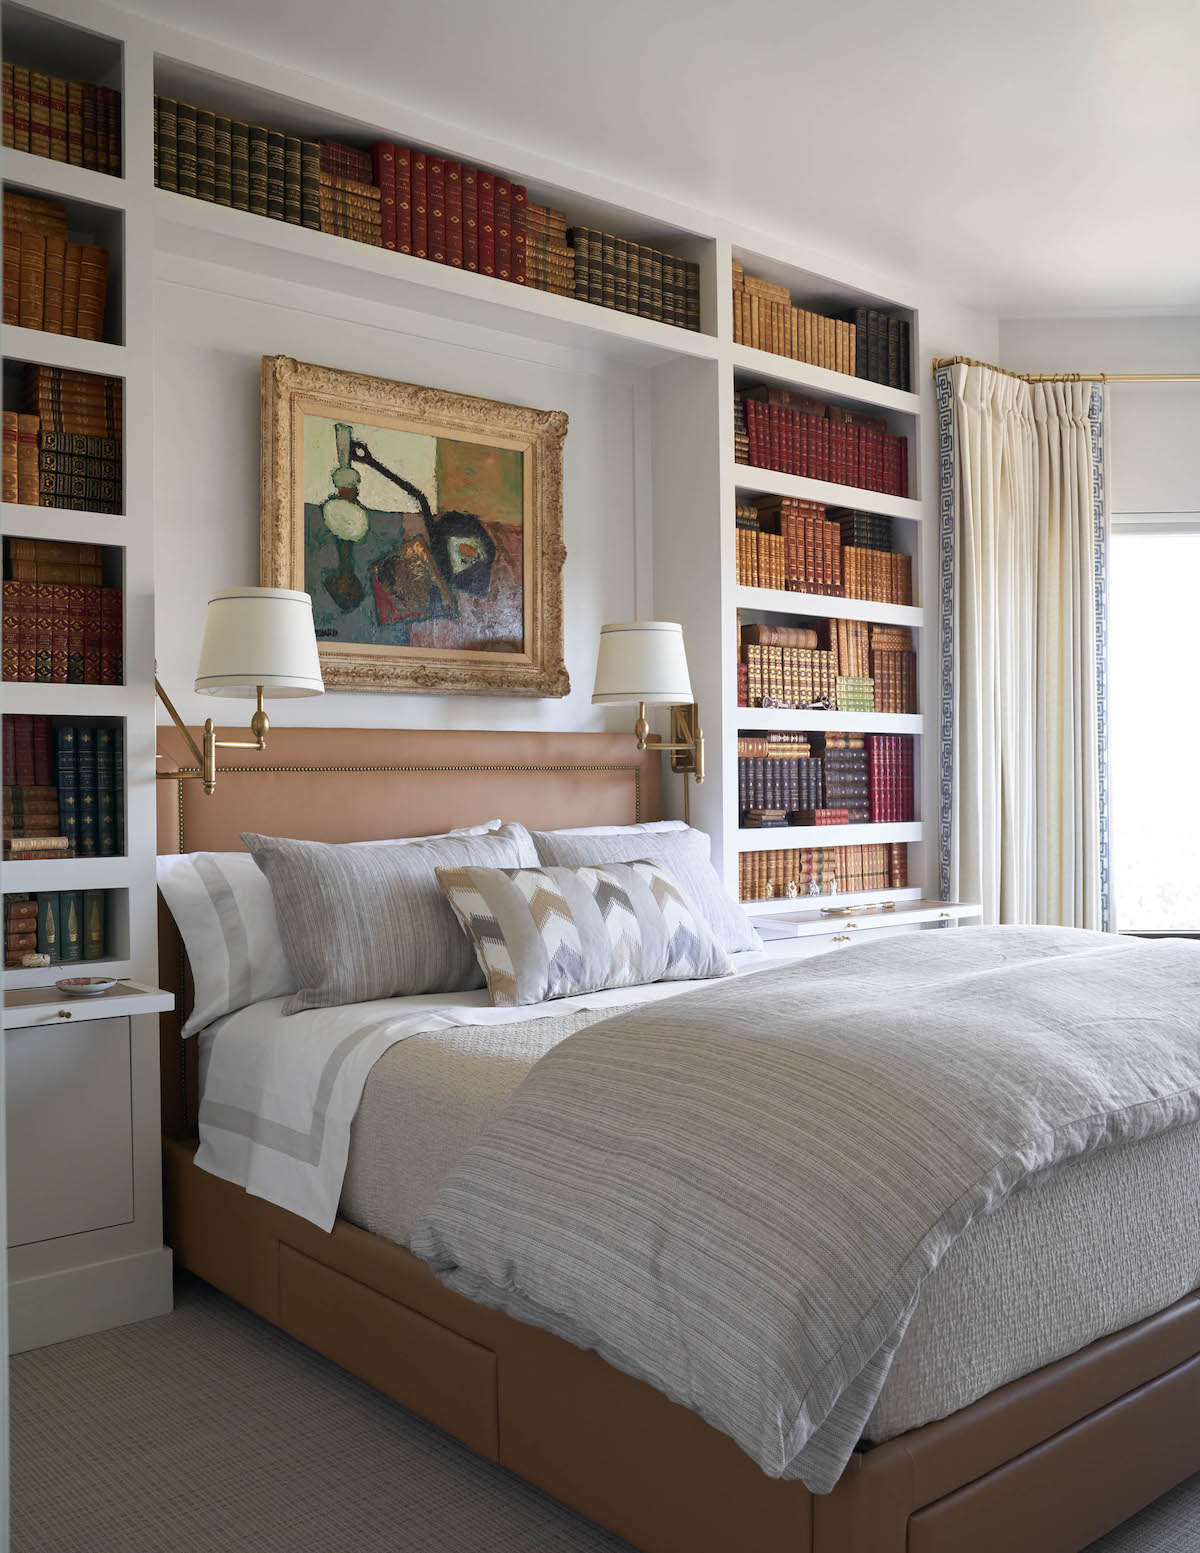 A bedroom that doubles as a library created by Dallas interior designer Josh Pickering.